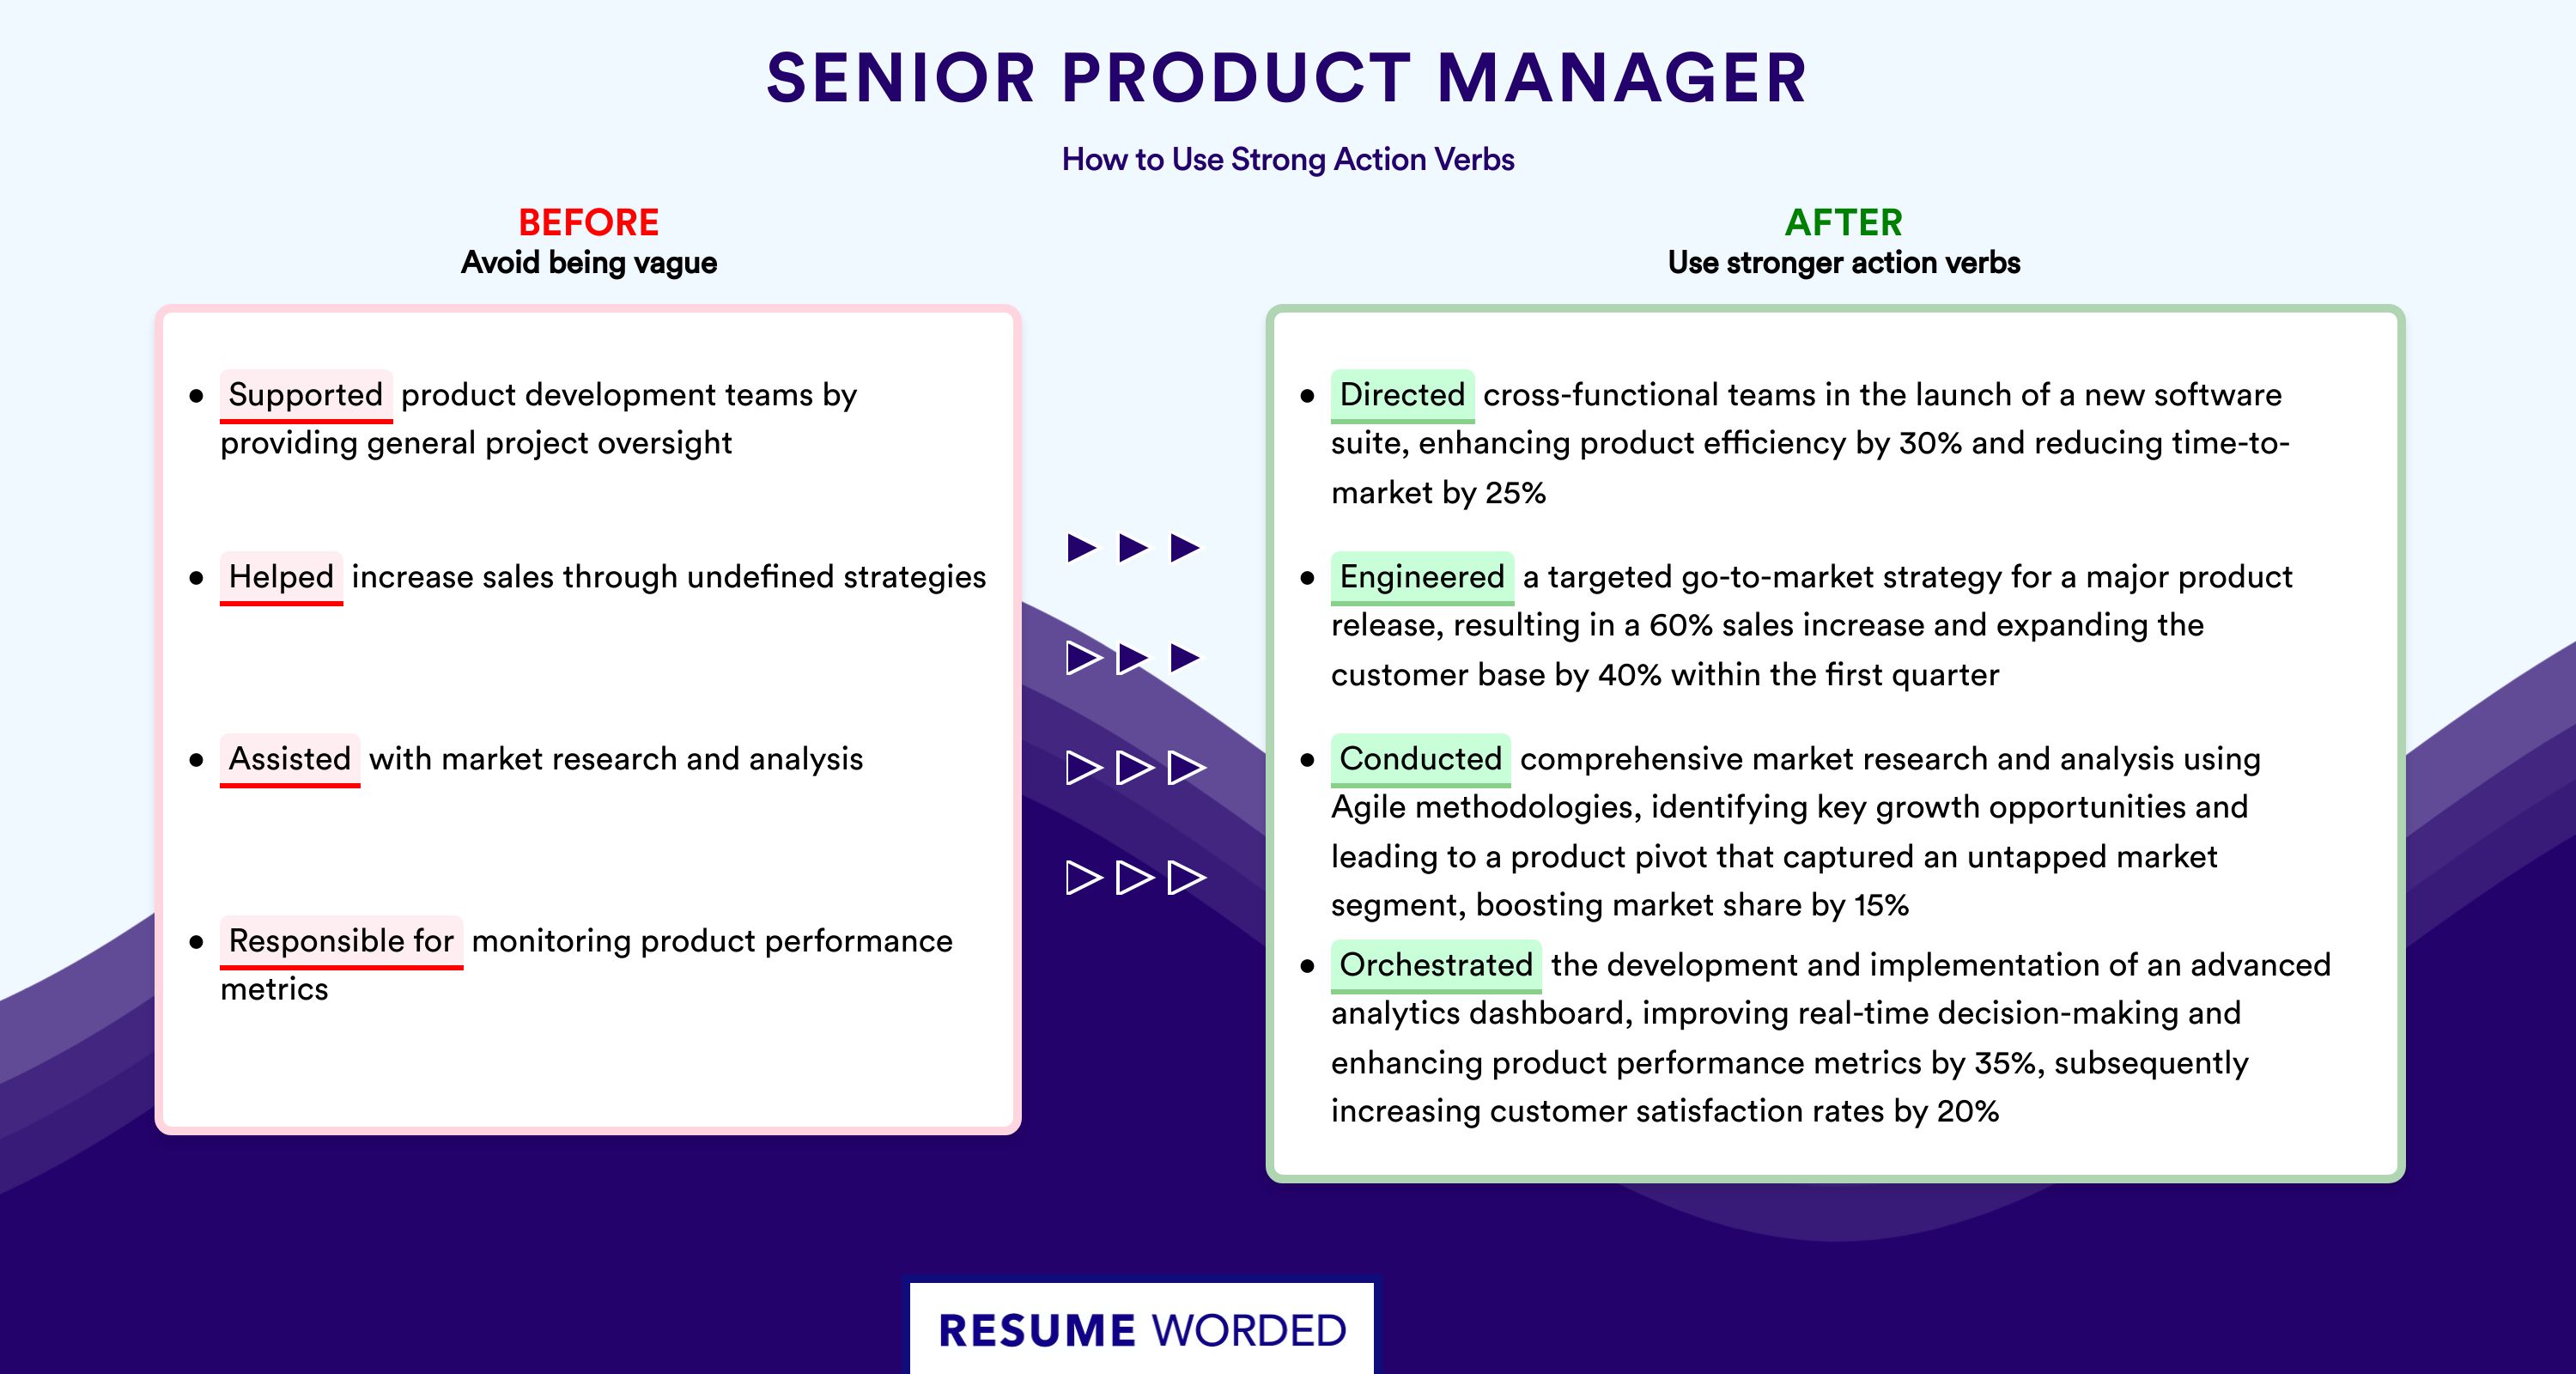 Action Verbs for Senior Product Manager